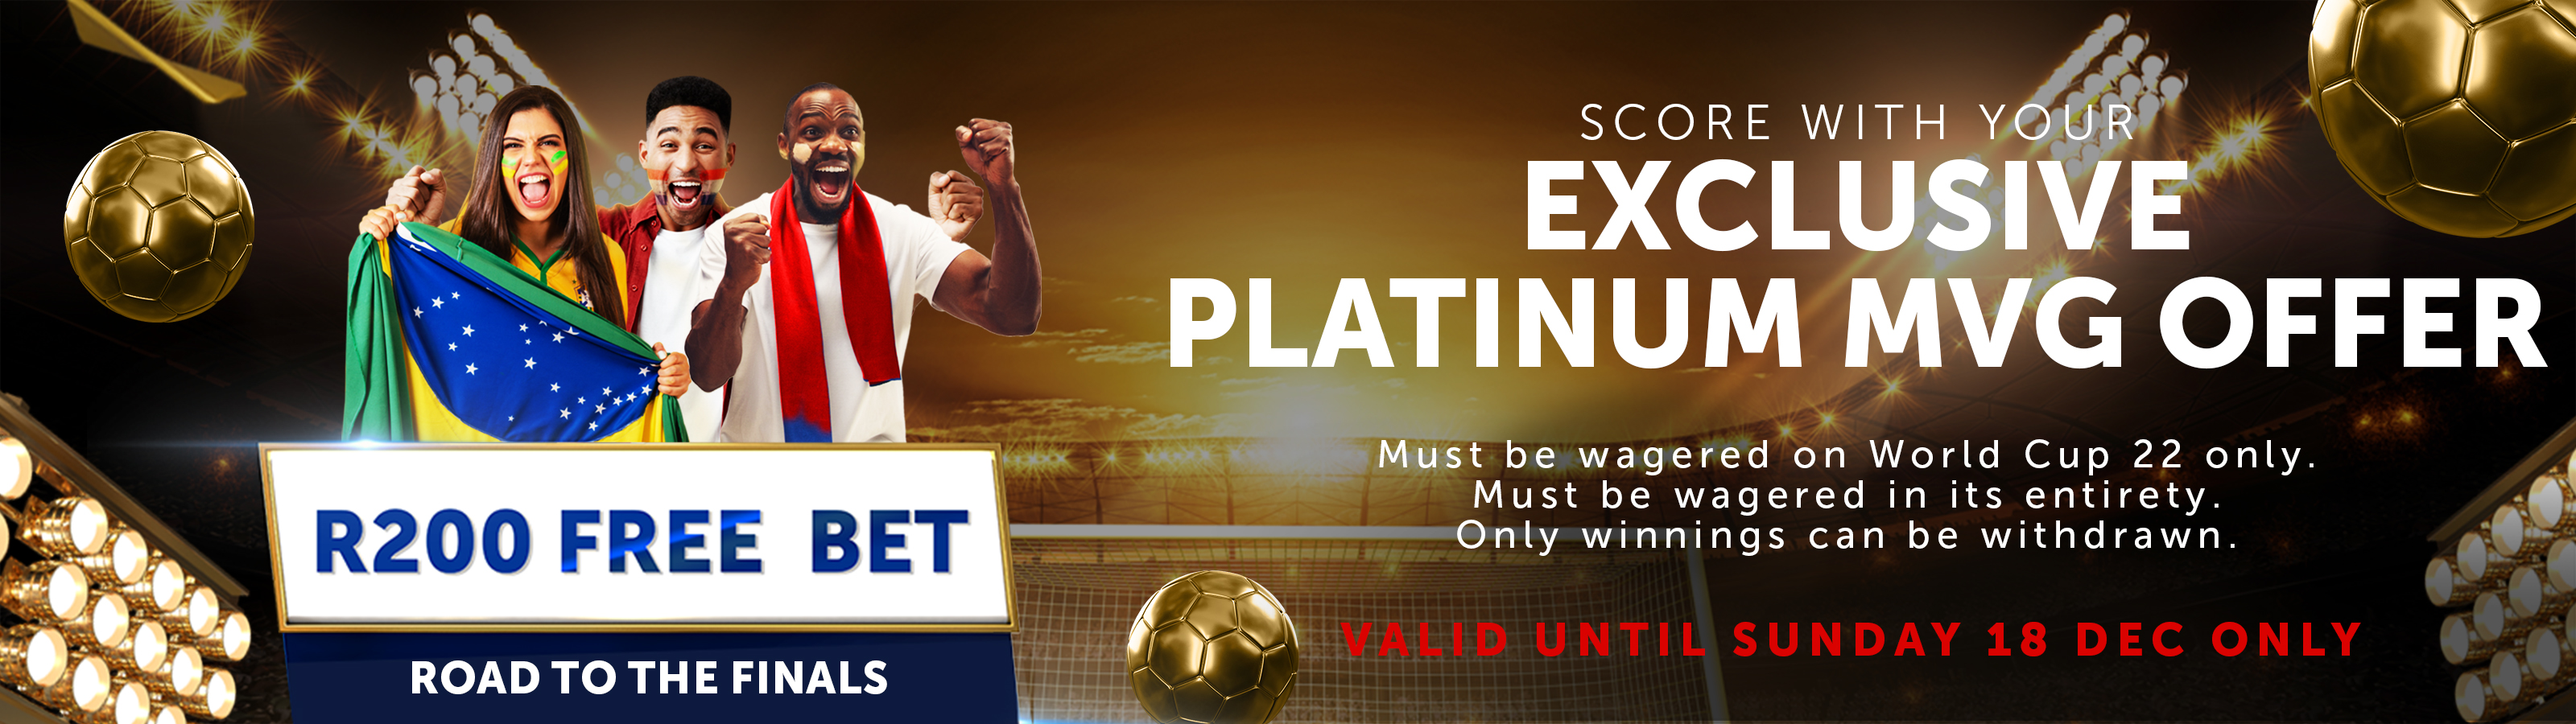 Score with your exclusive diamond offer. R200 Free bets. Bet on Qatar22 on Sunbet